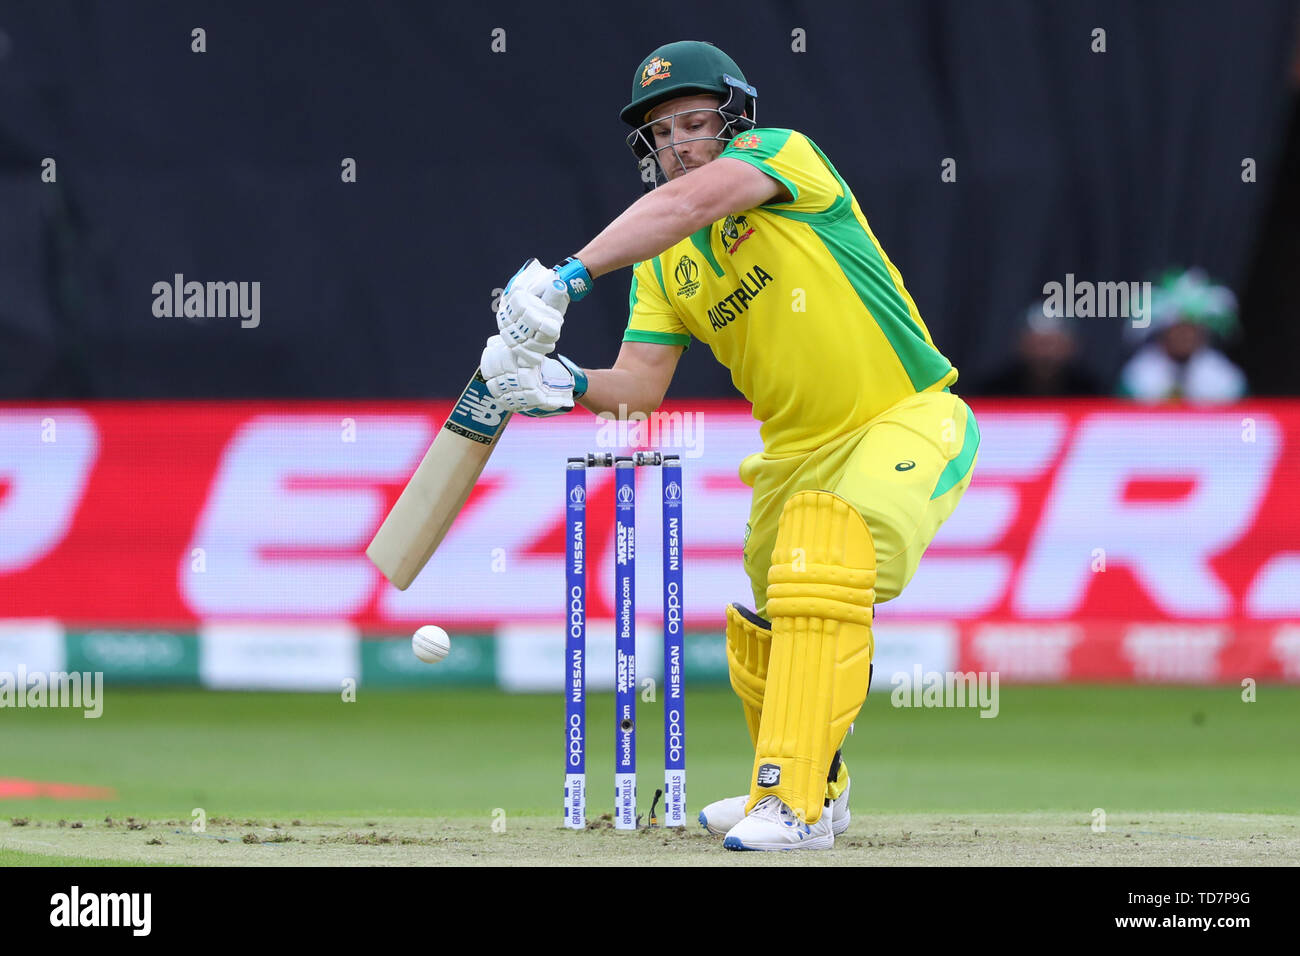 Taunton, UK. 12th June, 2019. Aaron Finch of Australia batting during the Australia v Pakistan, ICC Cricket World Cup match. at the County Ground, Taunton. Credit: Cal Sport Media/Alamy Live News Stock Photo